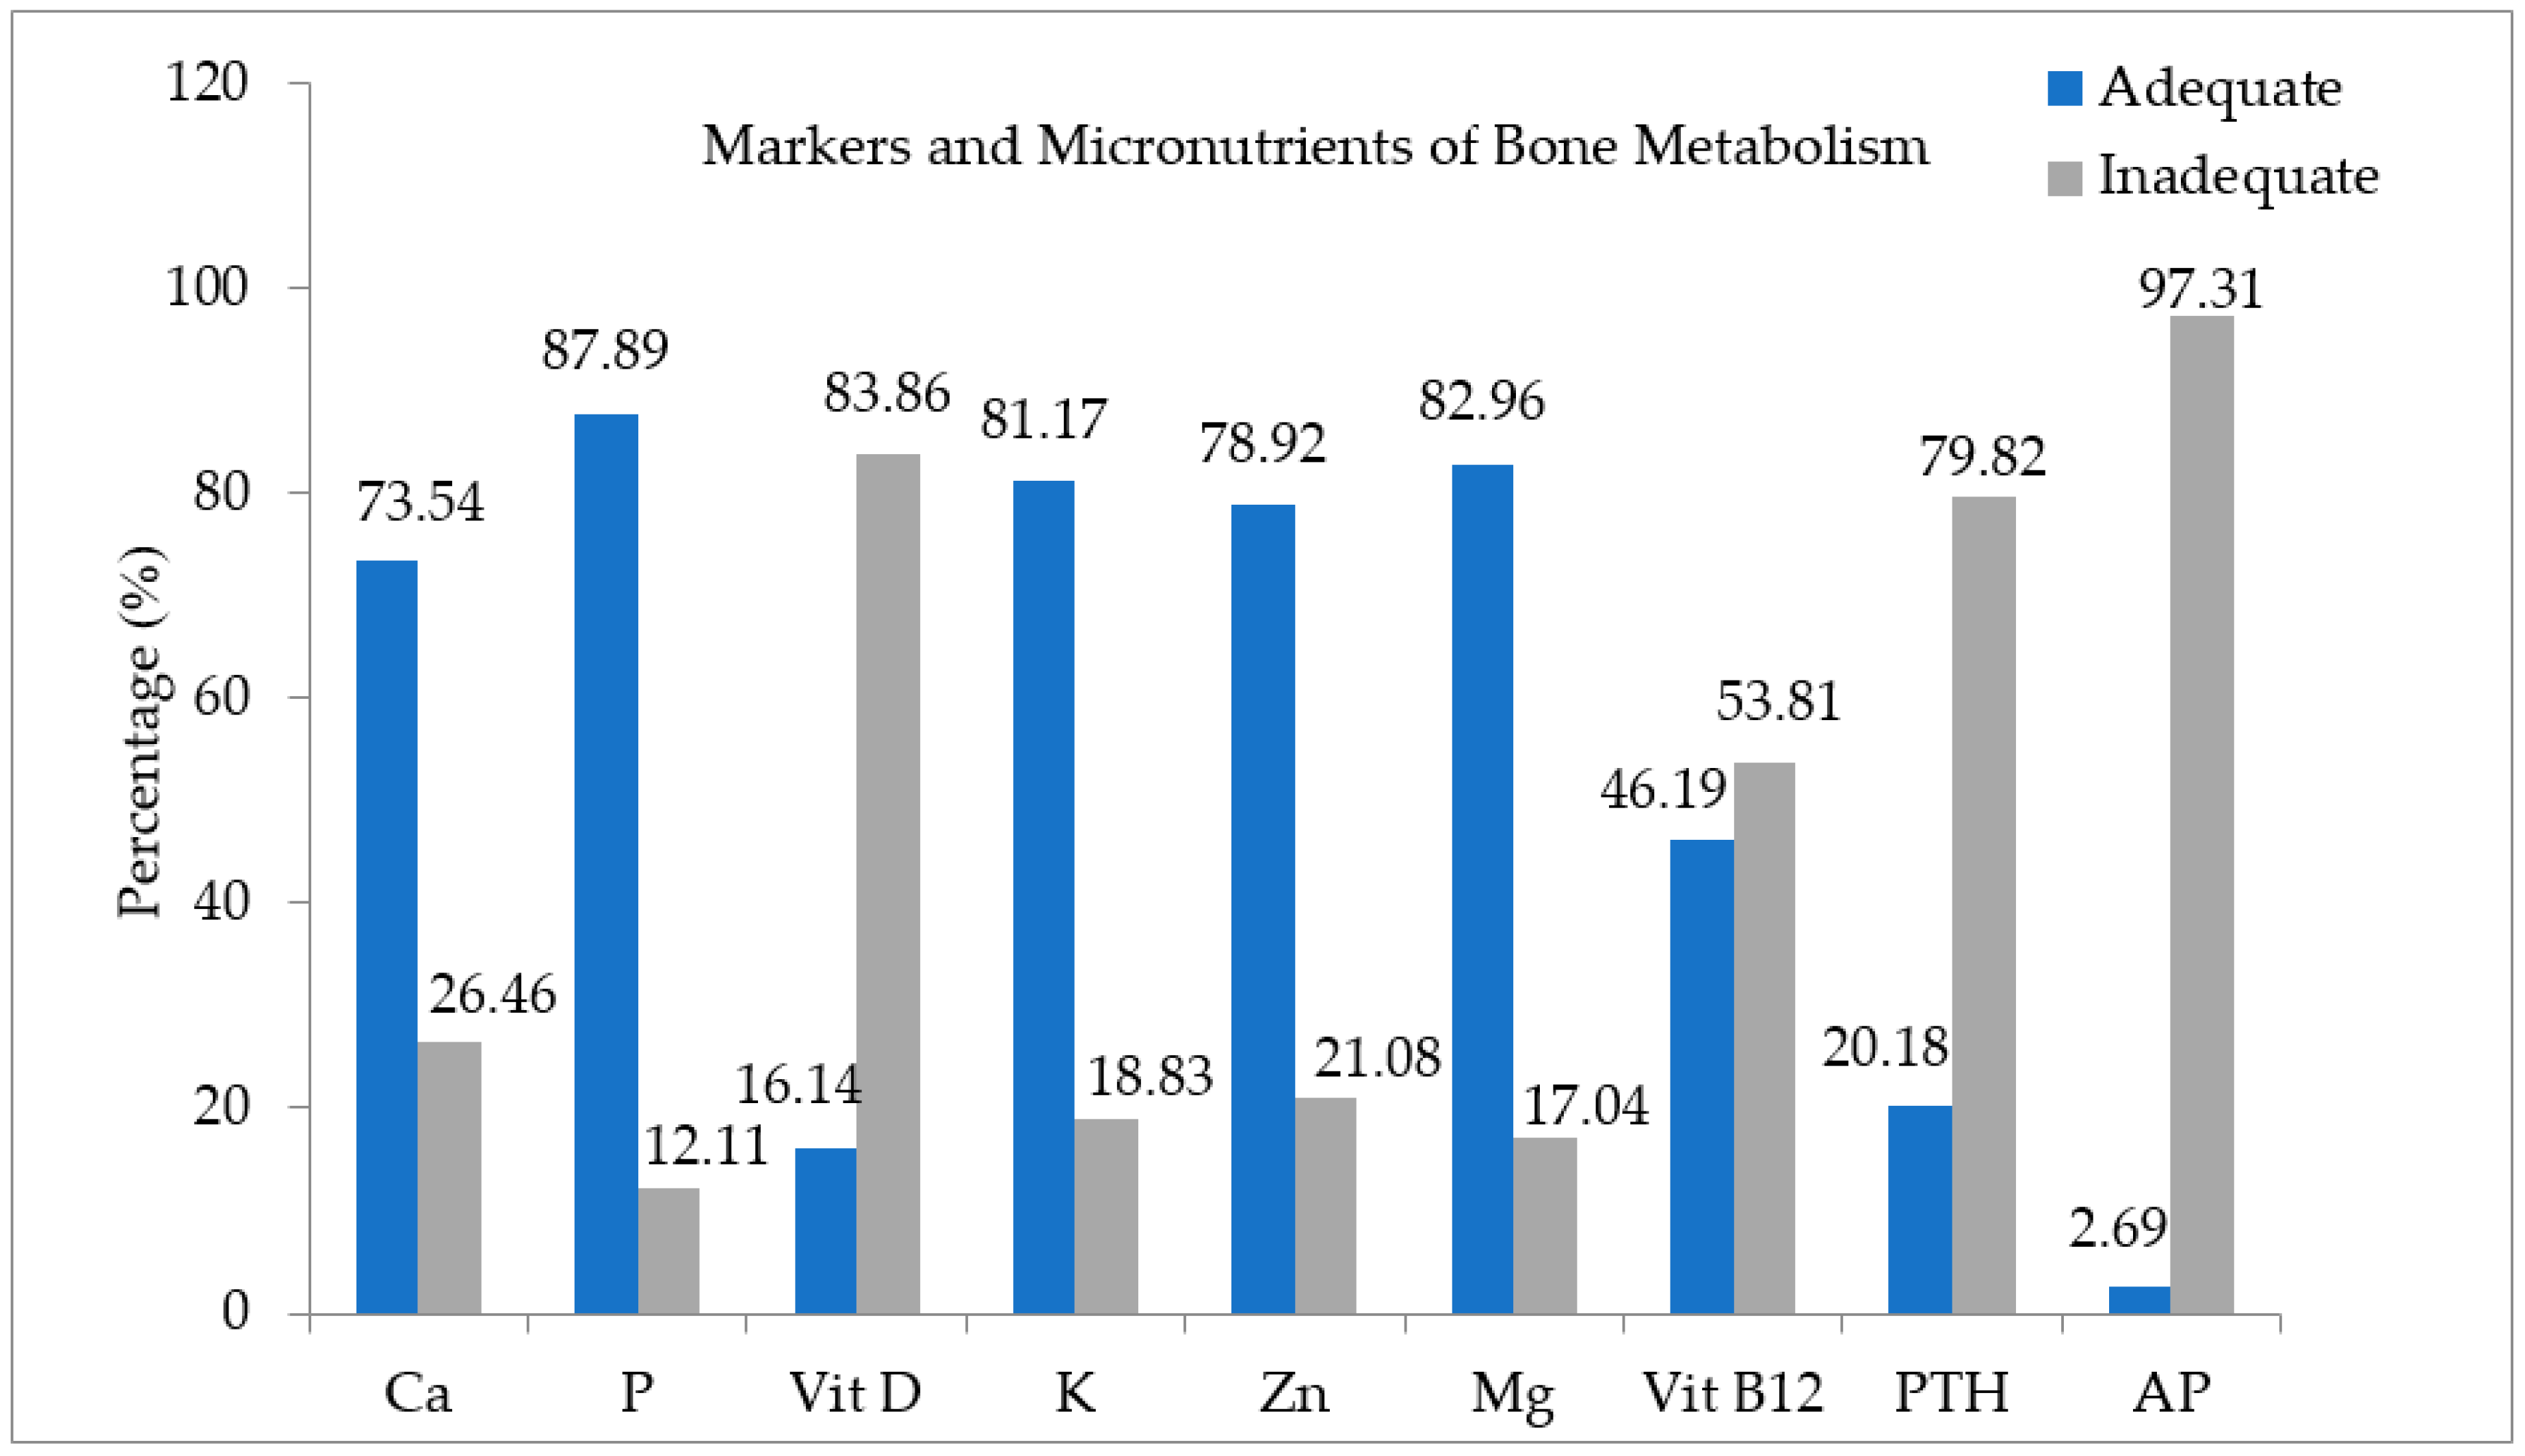 Nutrients Free Full Text Does The Metabolically Healthy Obese Phenotype Protect Adults With Class Iii Obesity From Biochemical Alterations Related To Bone Metabolism Html